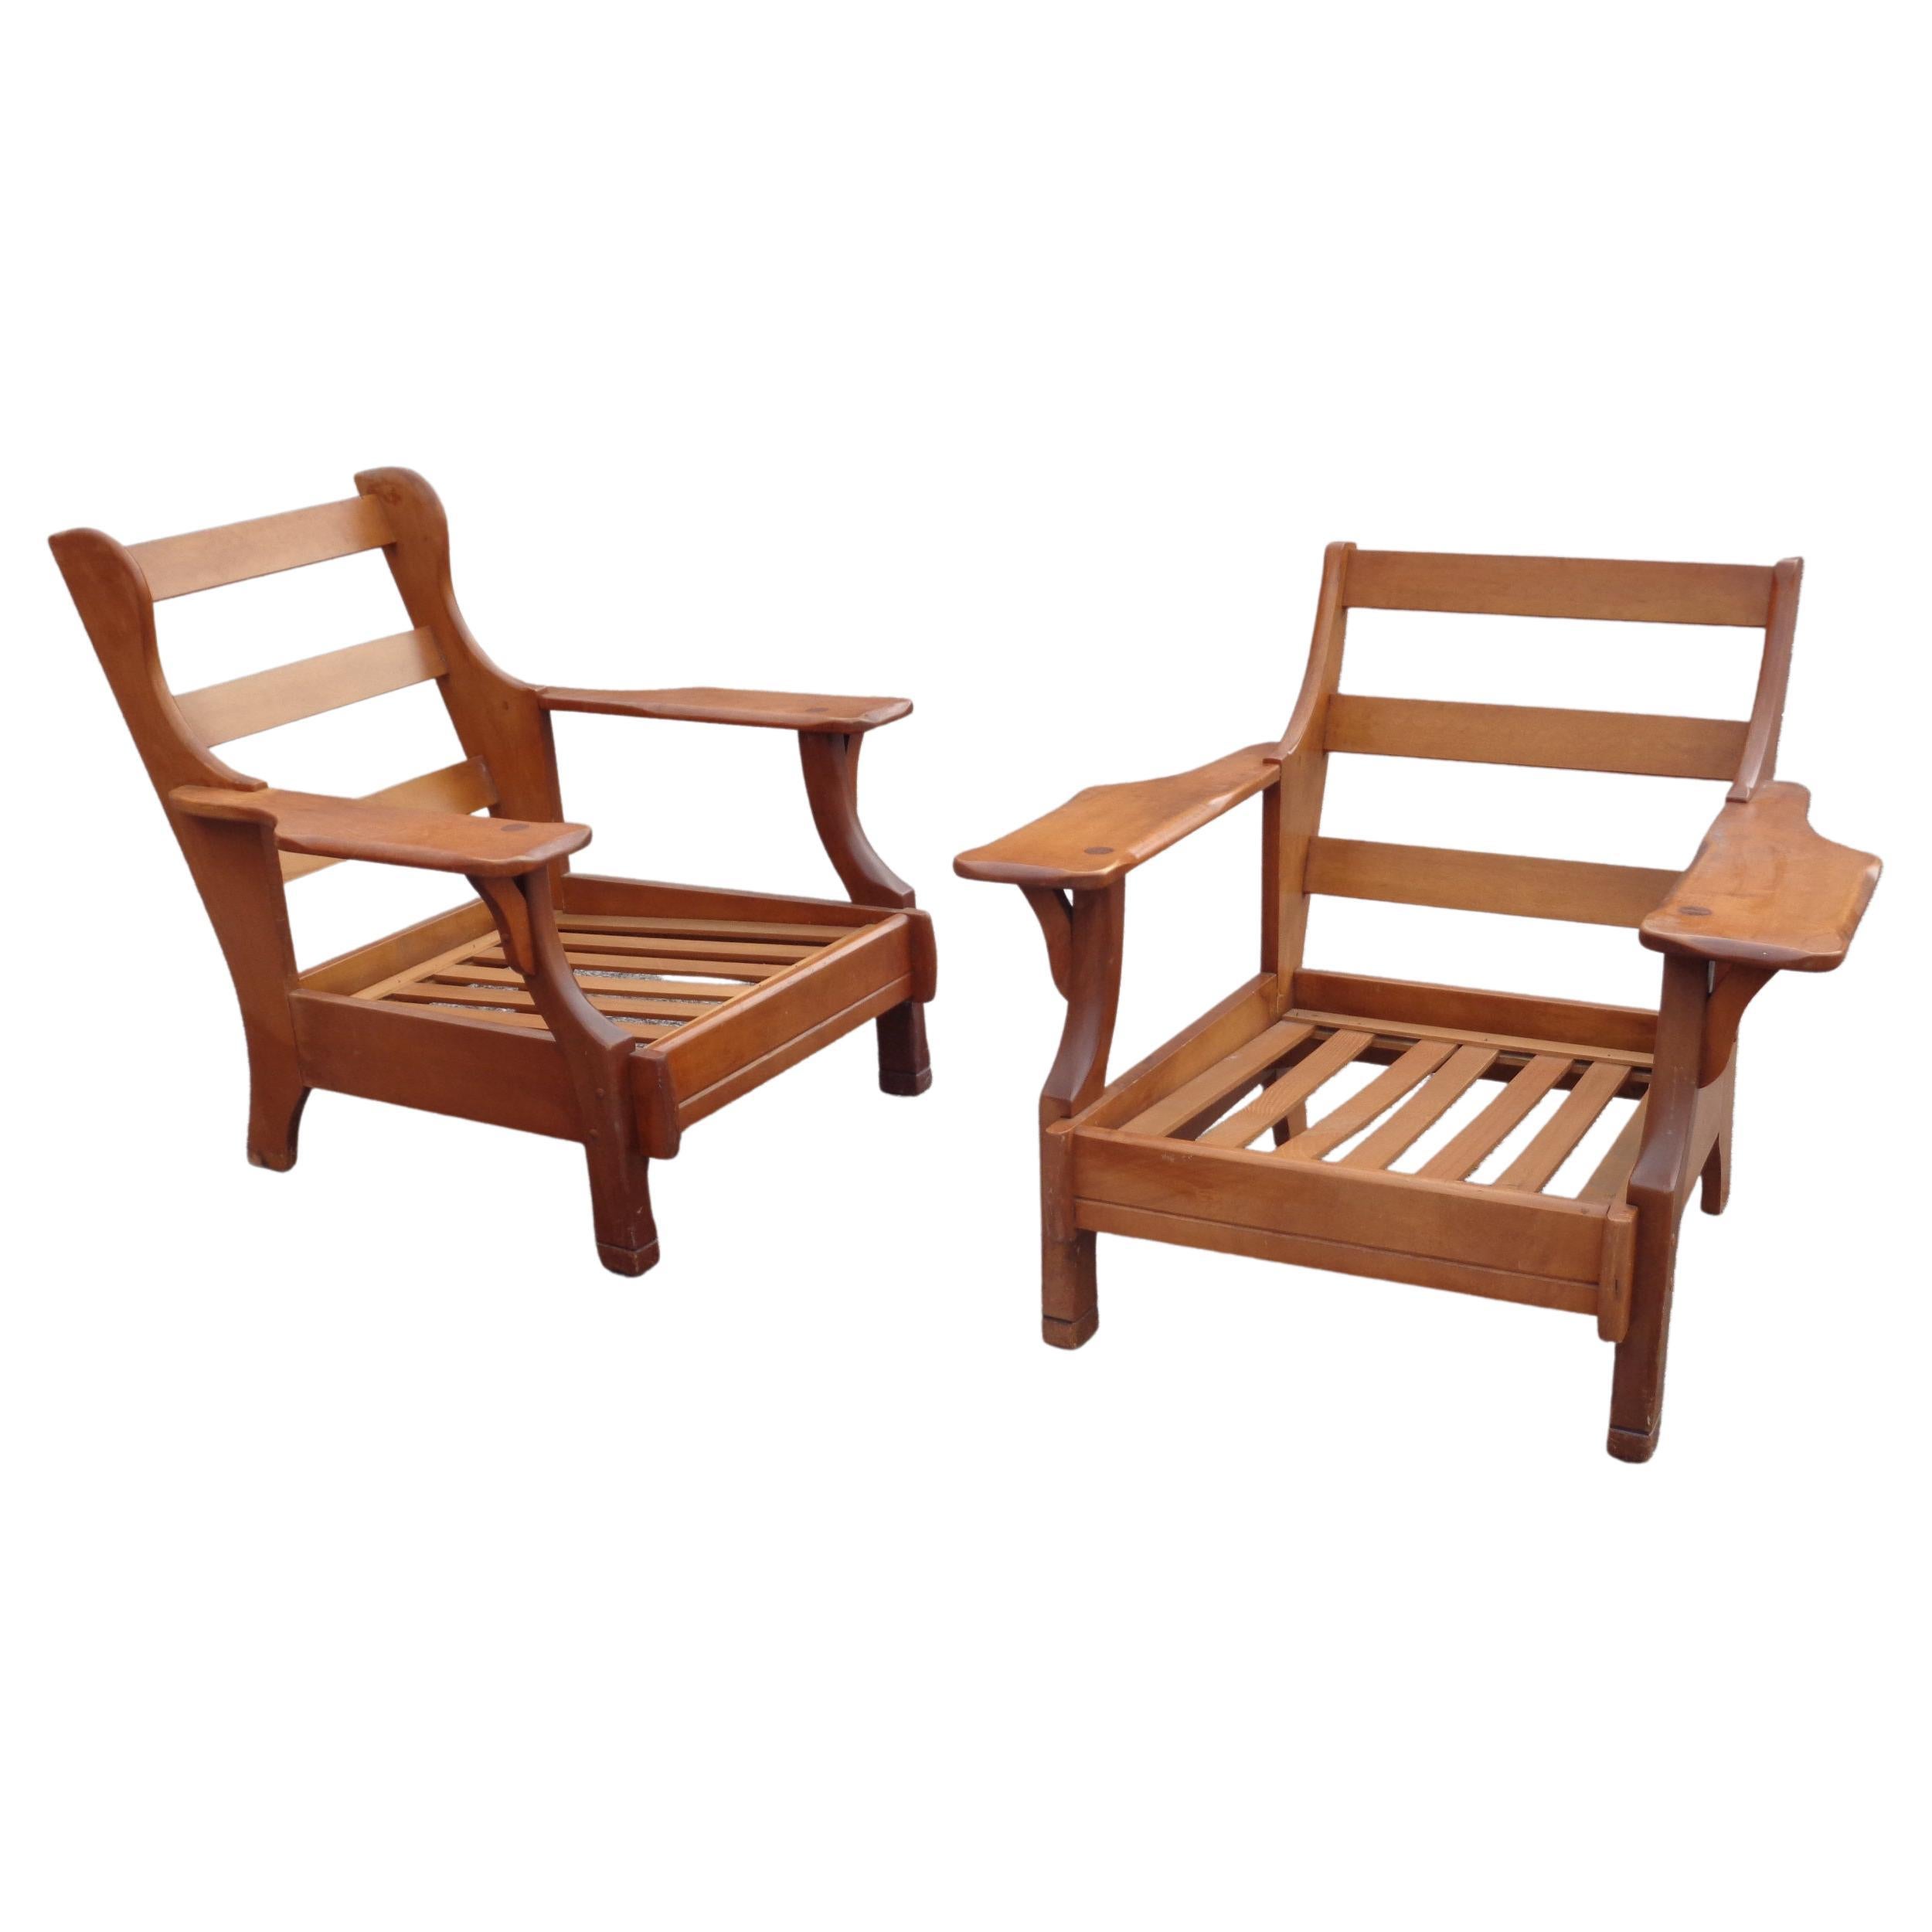 Varnished Rustic Paddle Arm Lounge Chairs, circa 1940